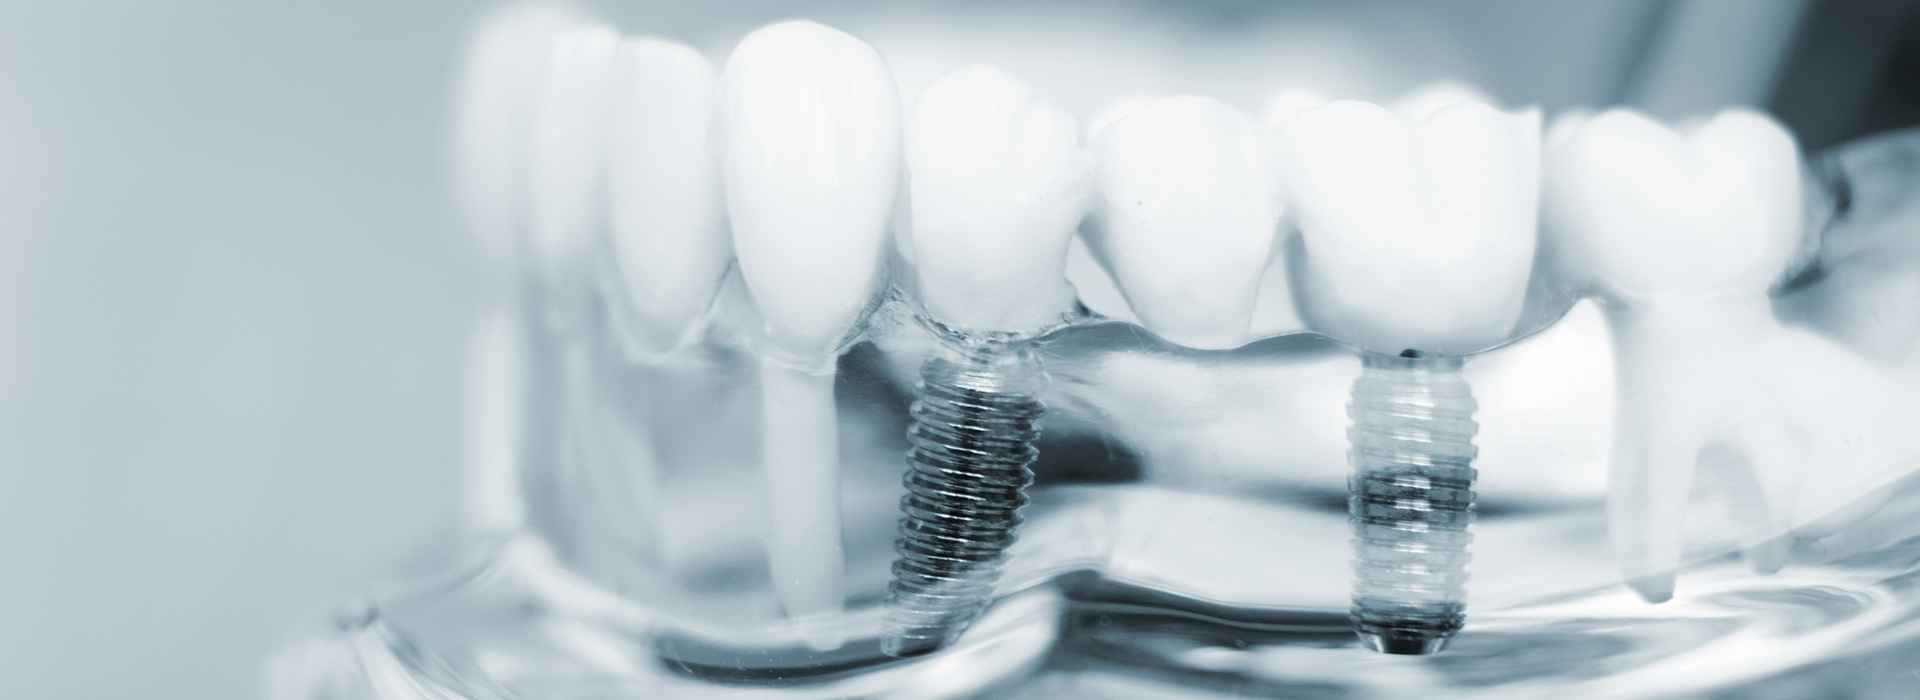 Armitage Oral Surgery | Zygomatic Dental Implants, Full Arch Restoration  All-on-X  and Dental Implant Placement